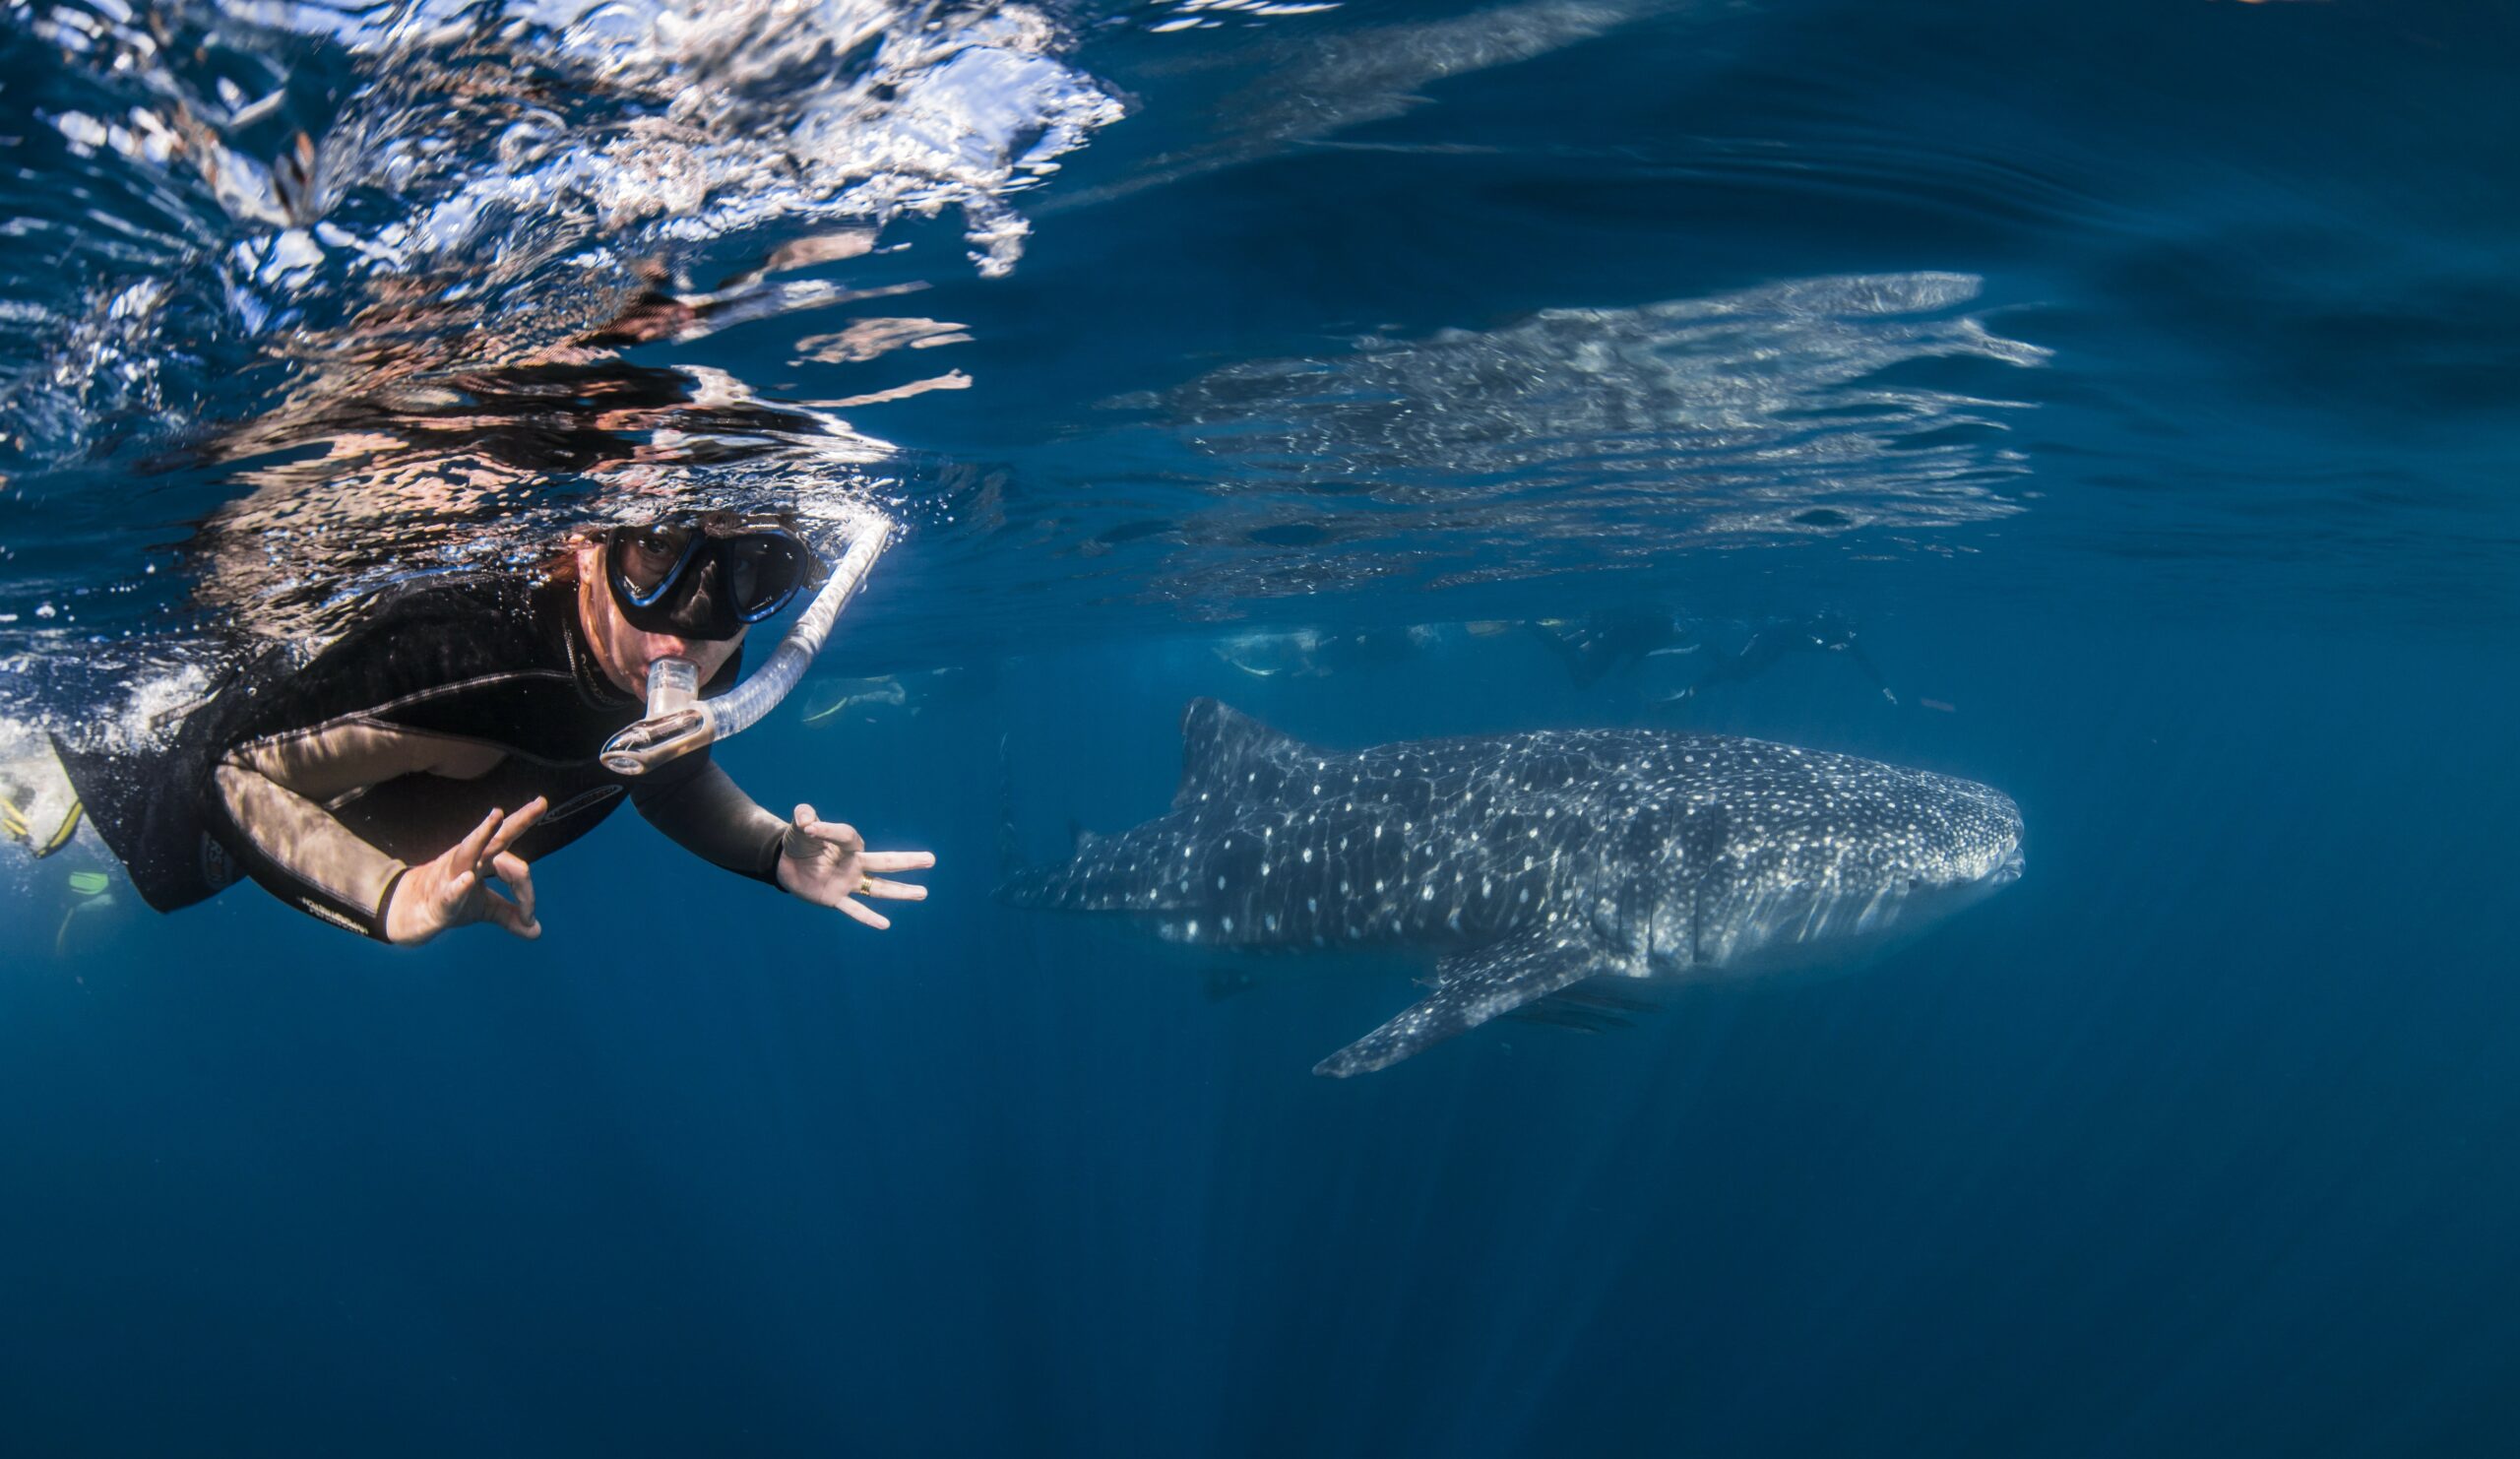 Deluxe Whaleshark Swim Tour aboard Blue Strike            (2 of 2 Boats Available).